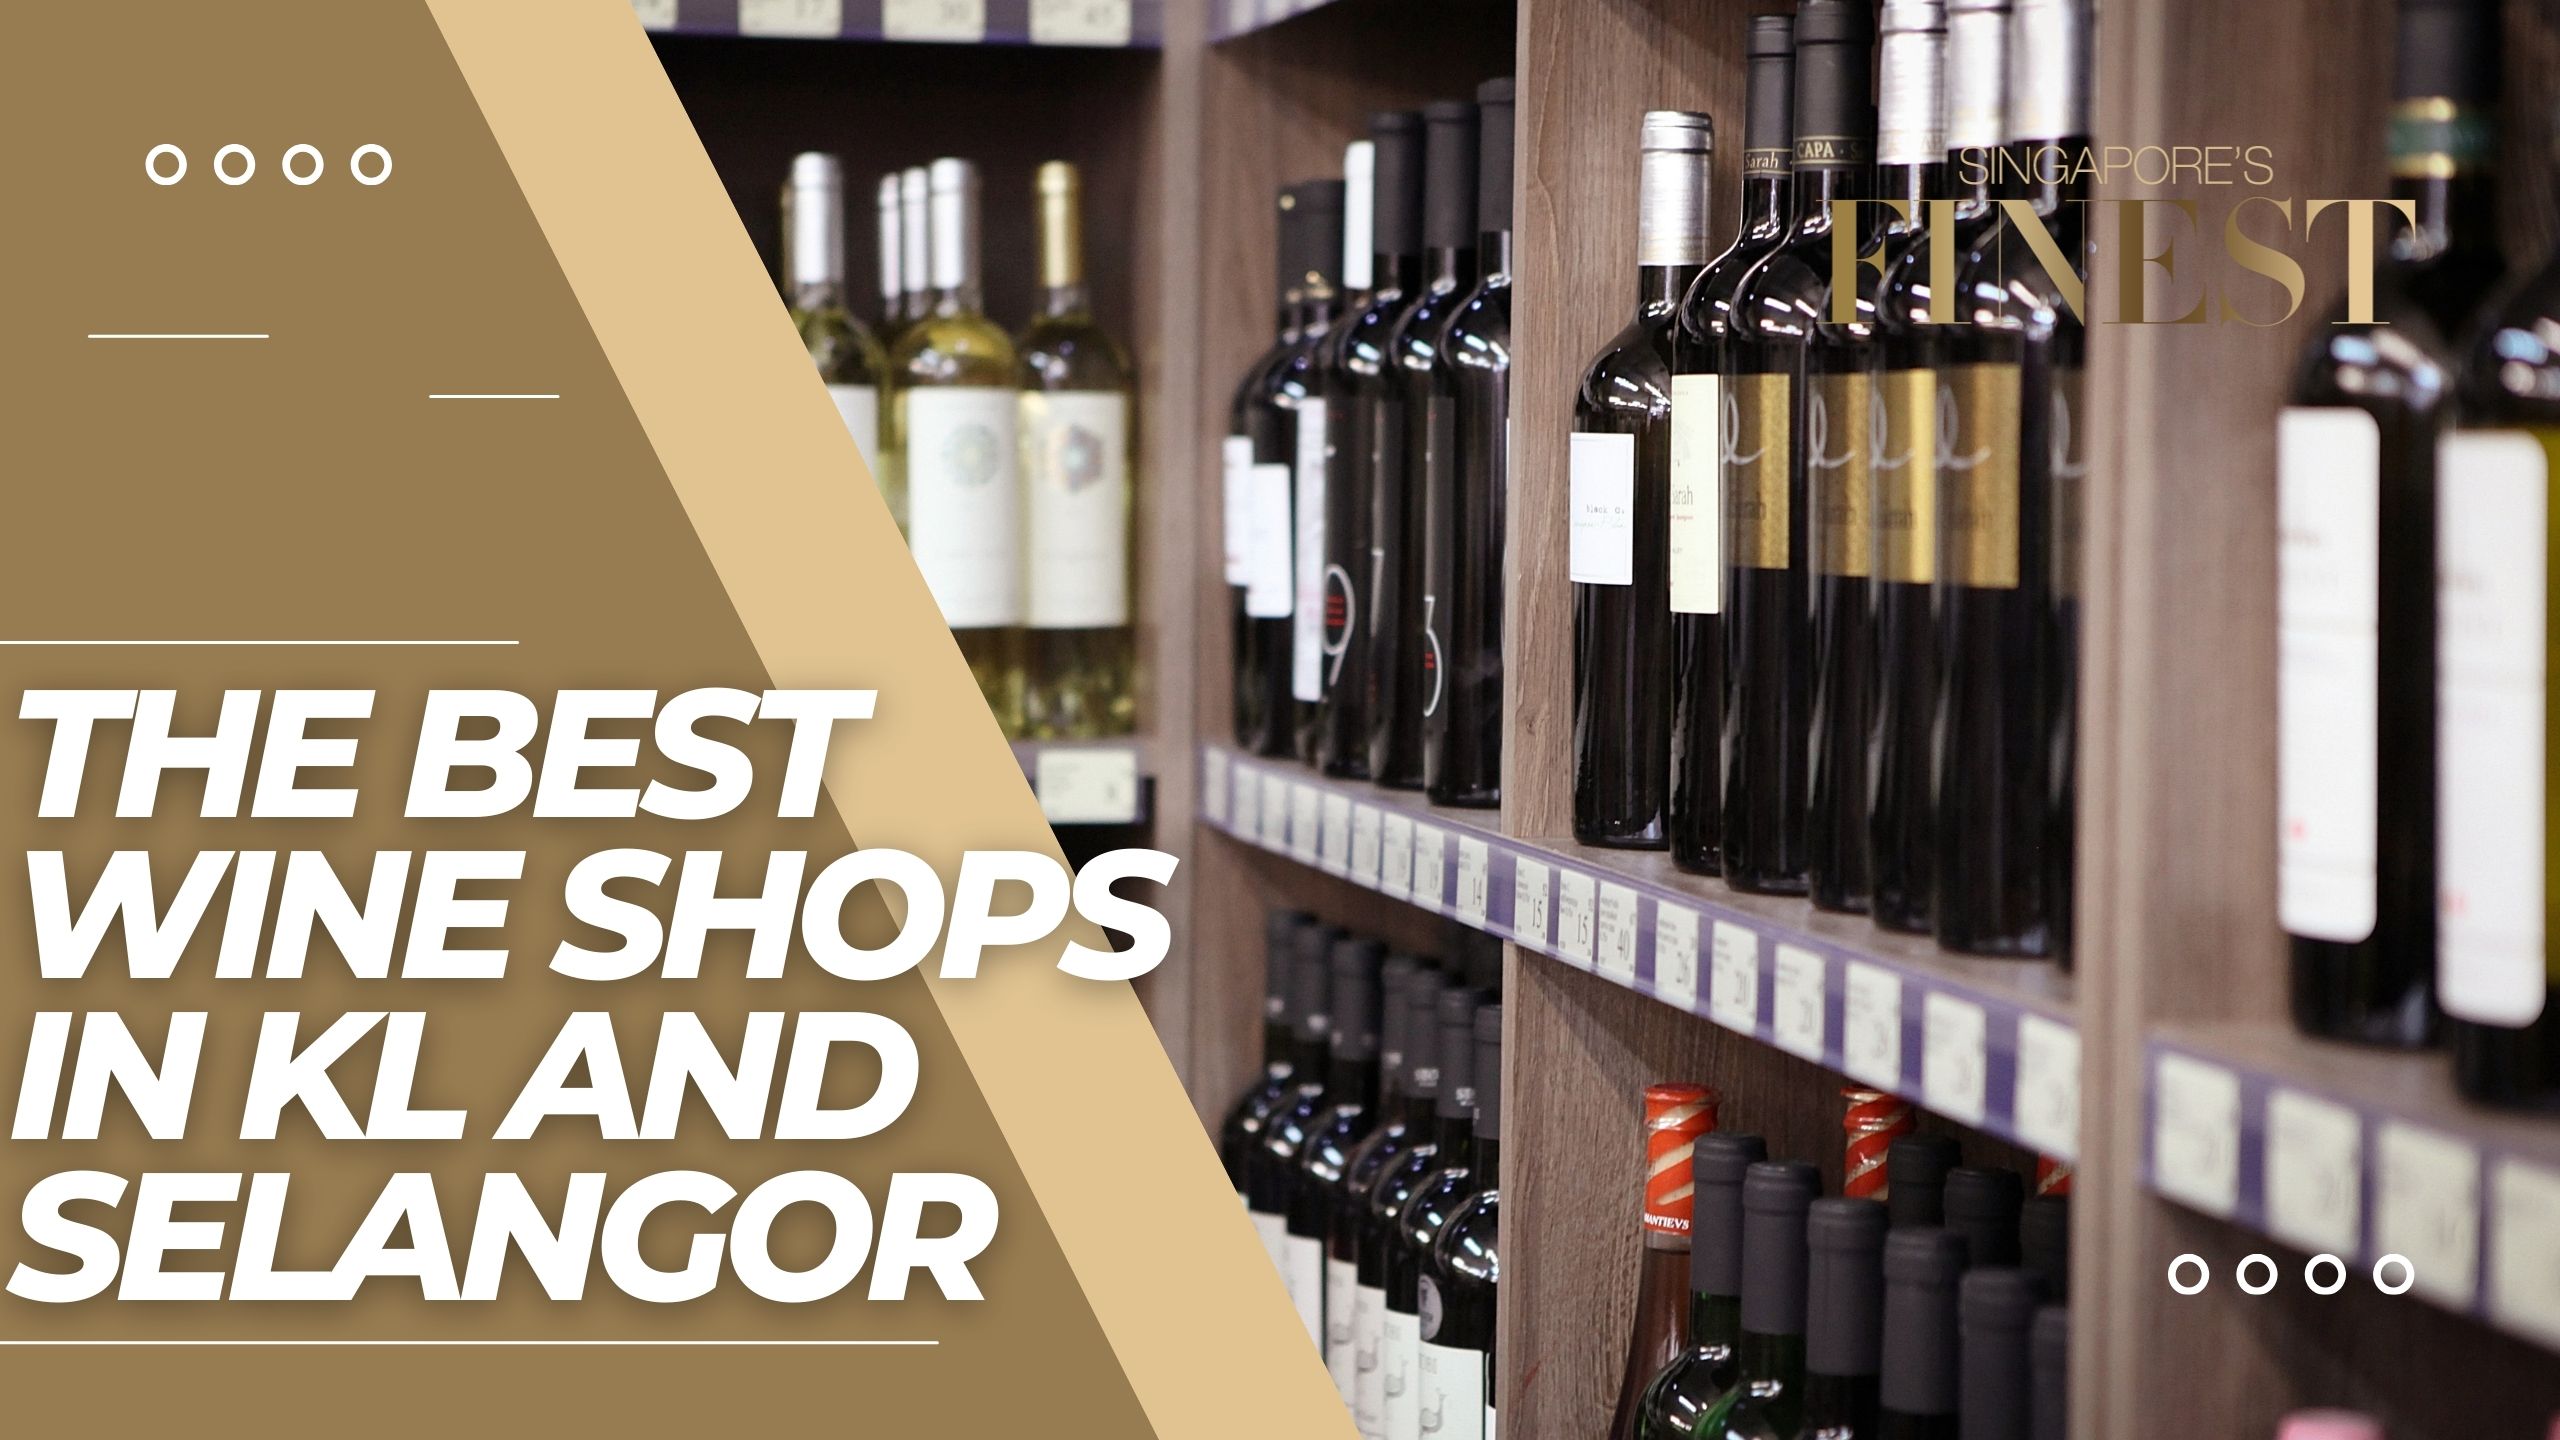 The Finest Wine Shops in KL and Selangor